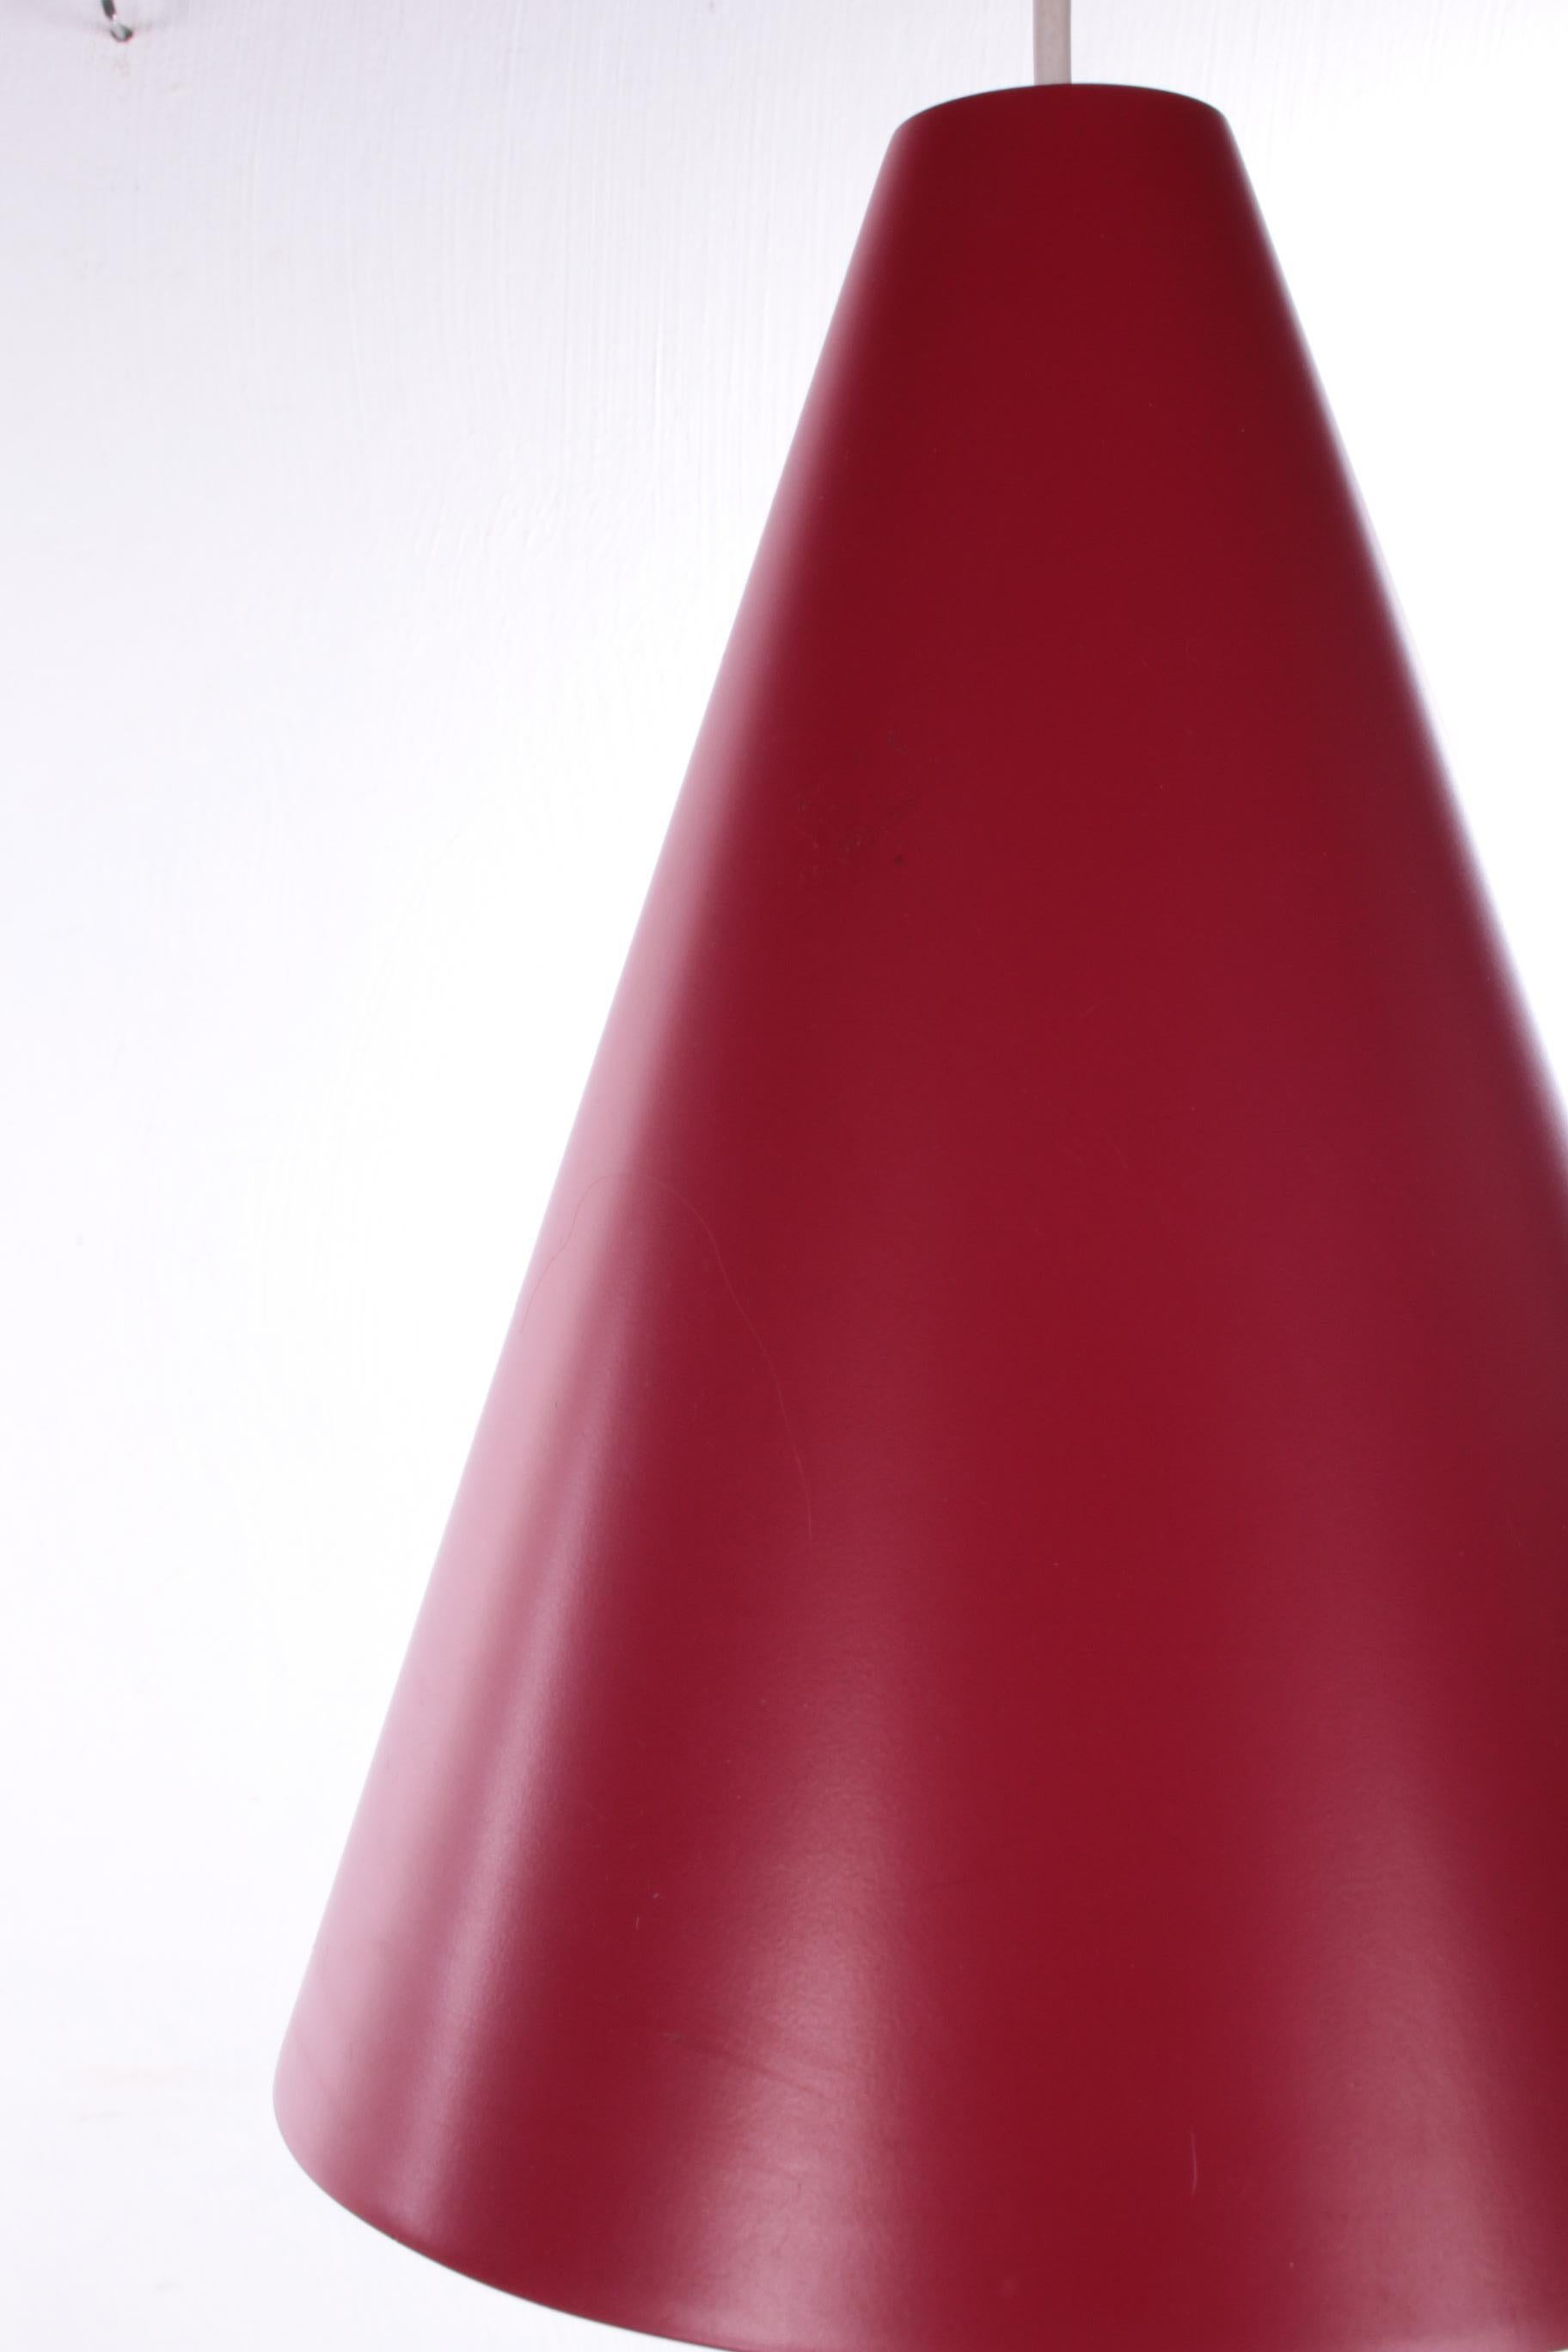 Red Point Hanging Lamp with Glass in It Made in the 1960s 2